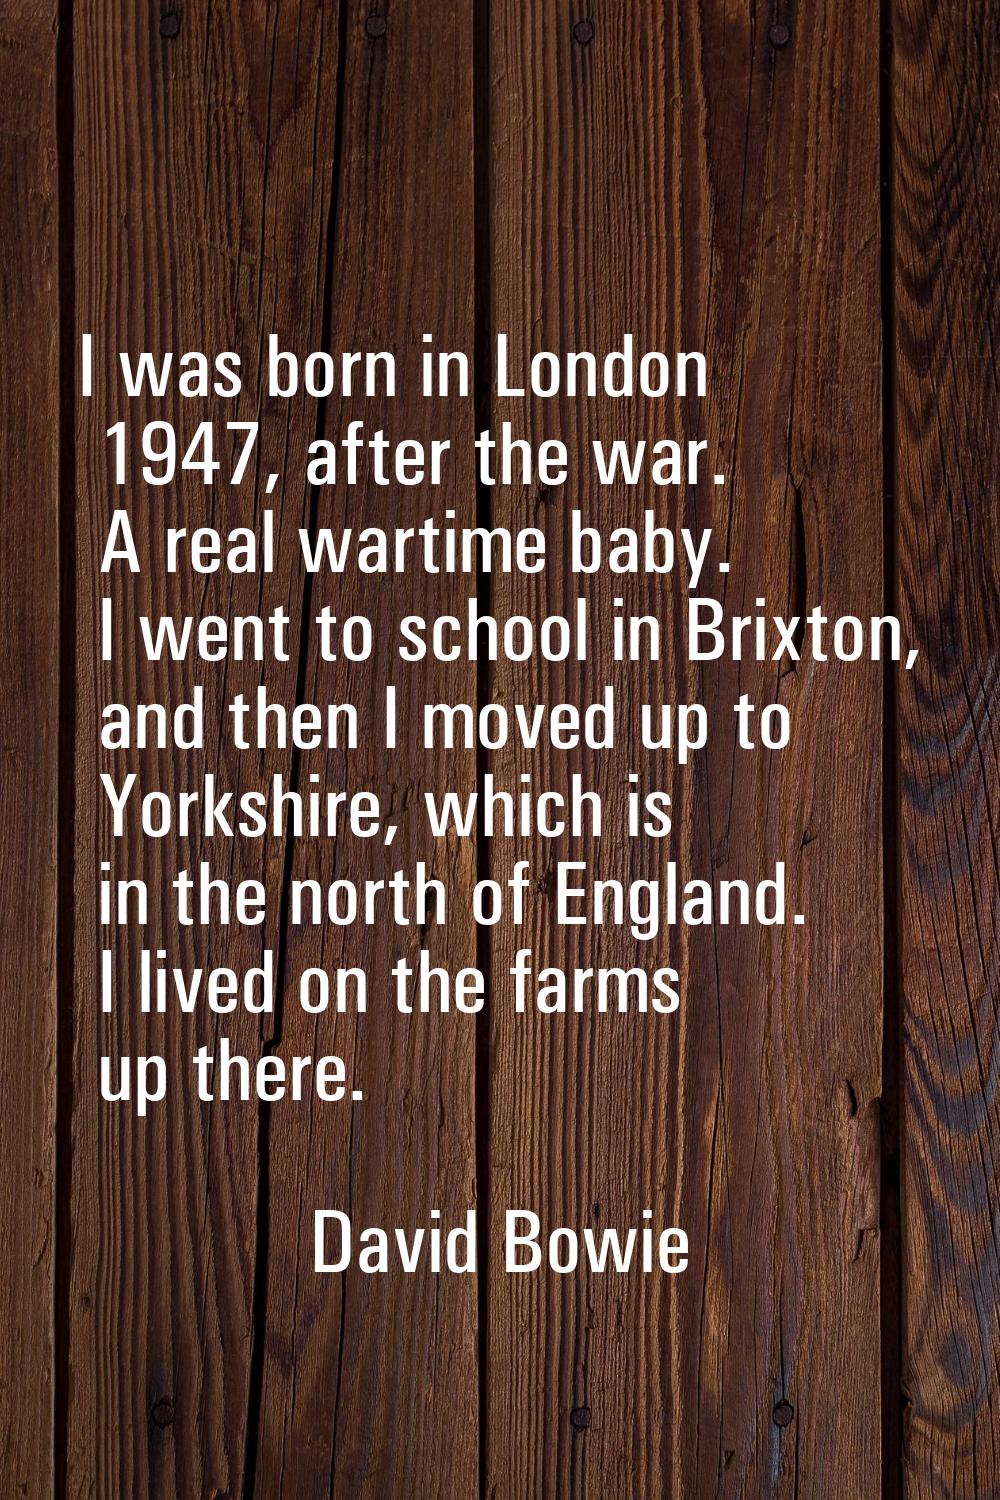 I was born in London 1947, after the war. A real wartime baby. I went to school in Brixton, and the